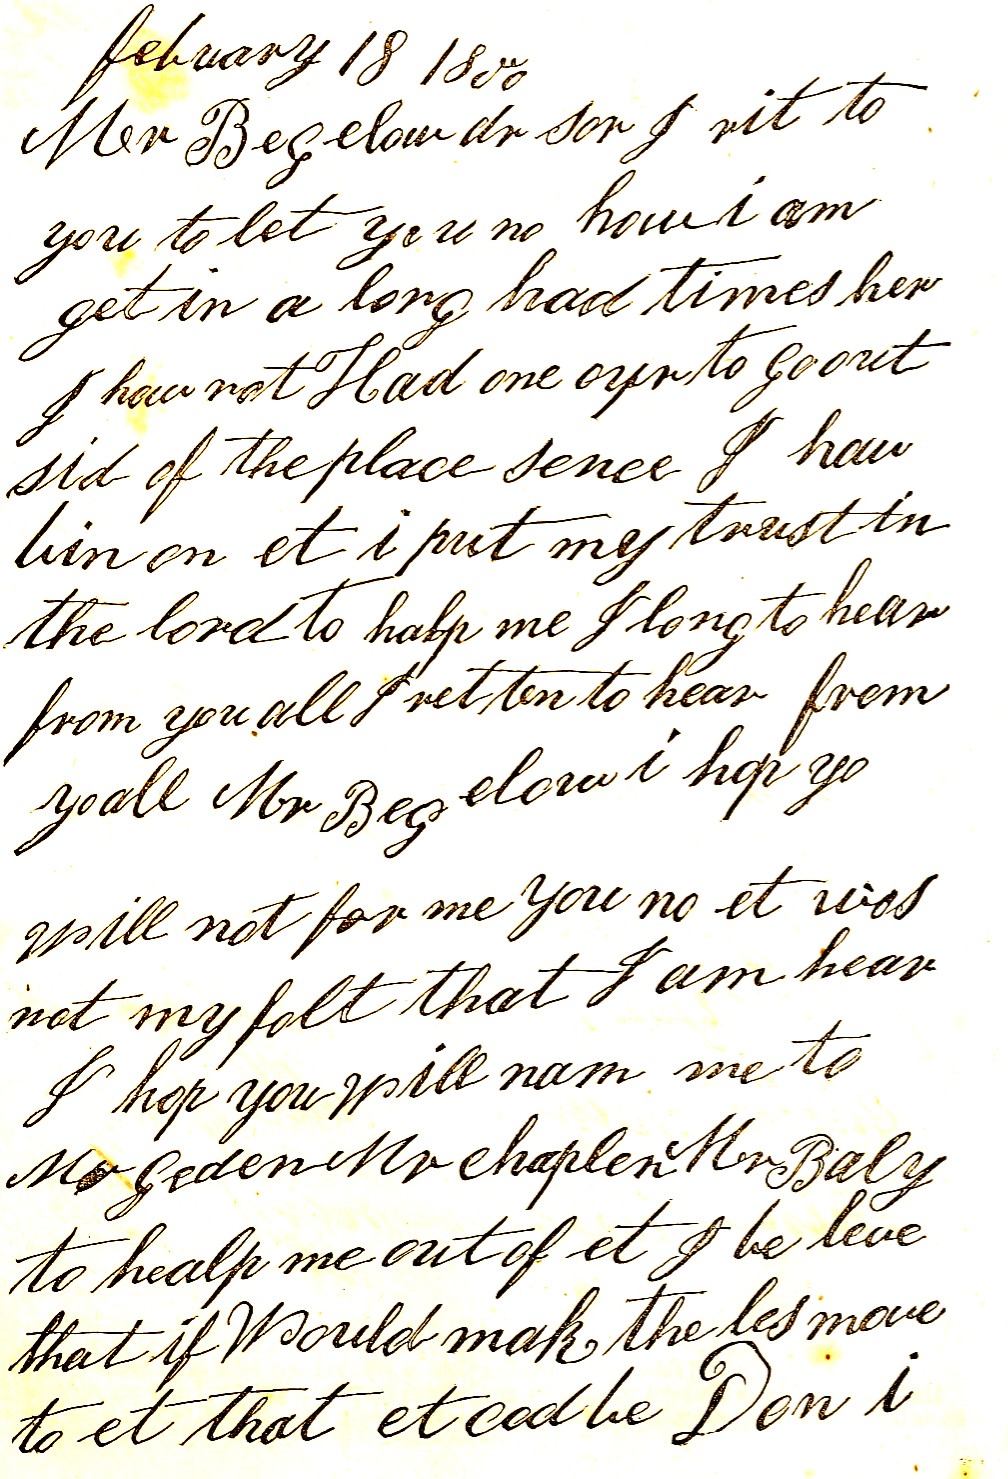 skuffe fløjte strubehoved File:A Key to Uncle Tom's Cabin (1853) letter.jpg - Wikimedia Commons